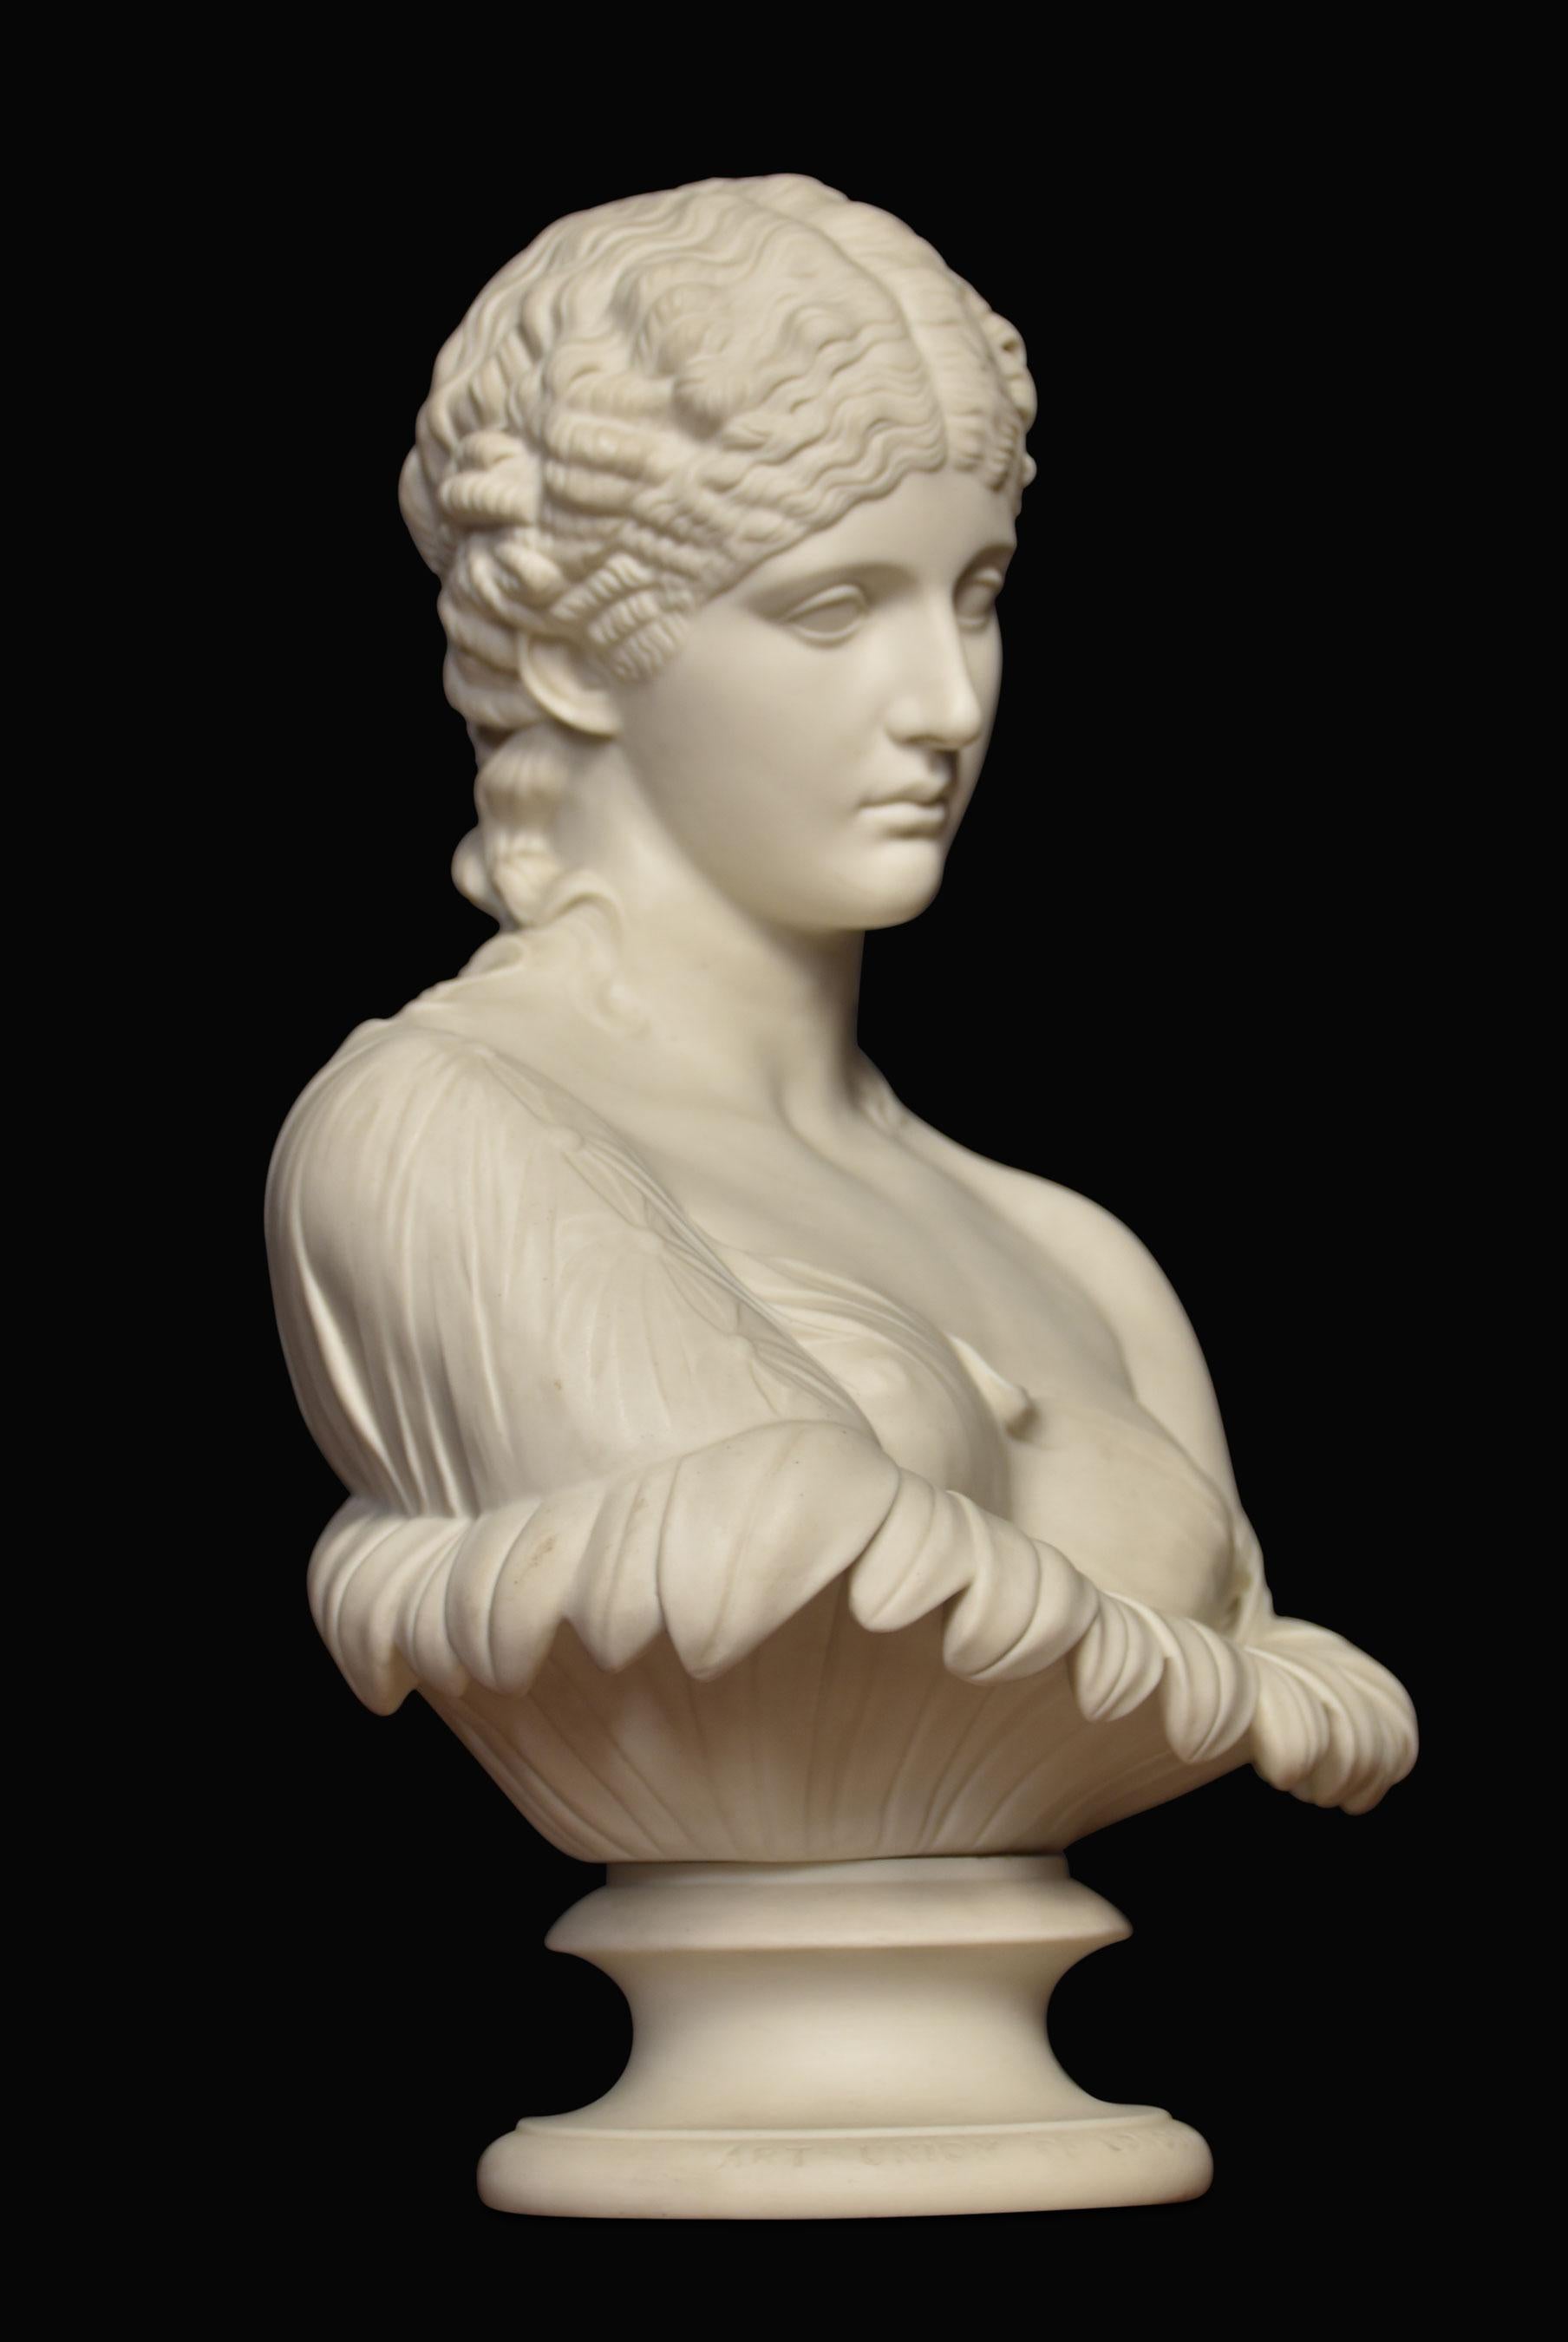 A large Art Union Parian bust depicting Clytie raised up on circular stepped base.
Dimensions
Height 13.5 inches
Width 10 inches
Depth 5.5 inches.